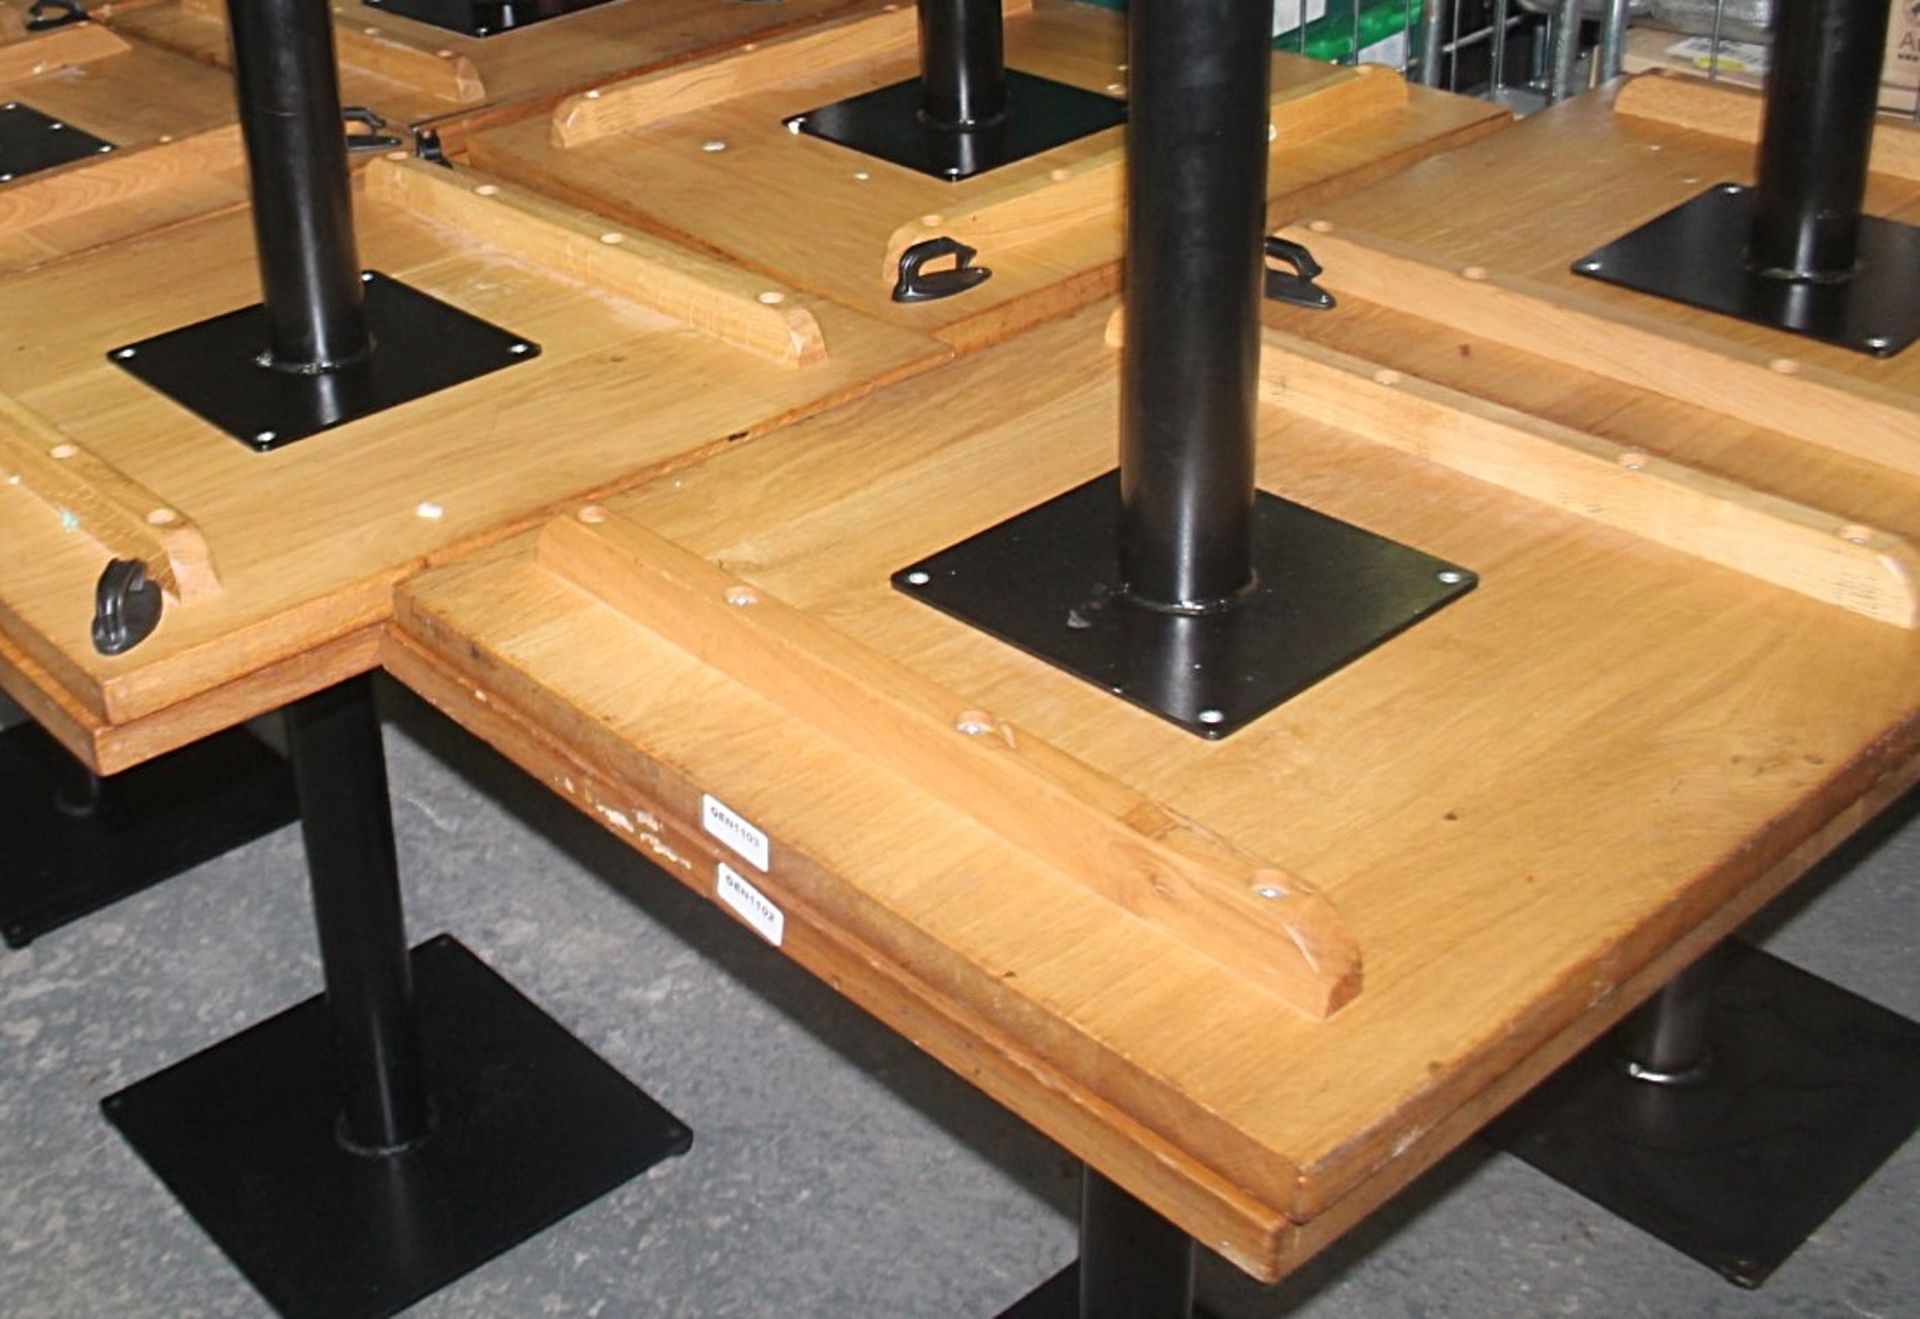 4 x Solid Oak Restaurant Dining Tables - Natural Rustic Knotty Oak Tops With Black Cast Iron Legs - Image 4 of 4